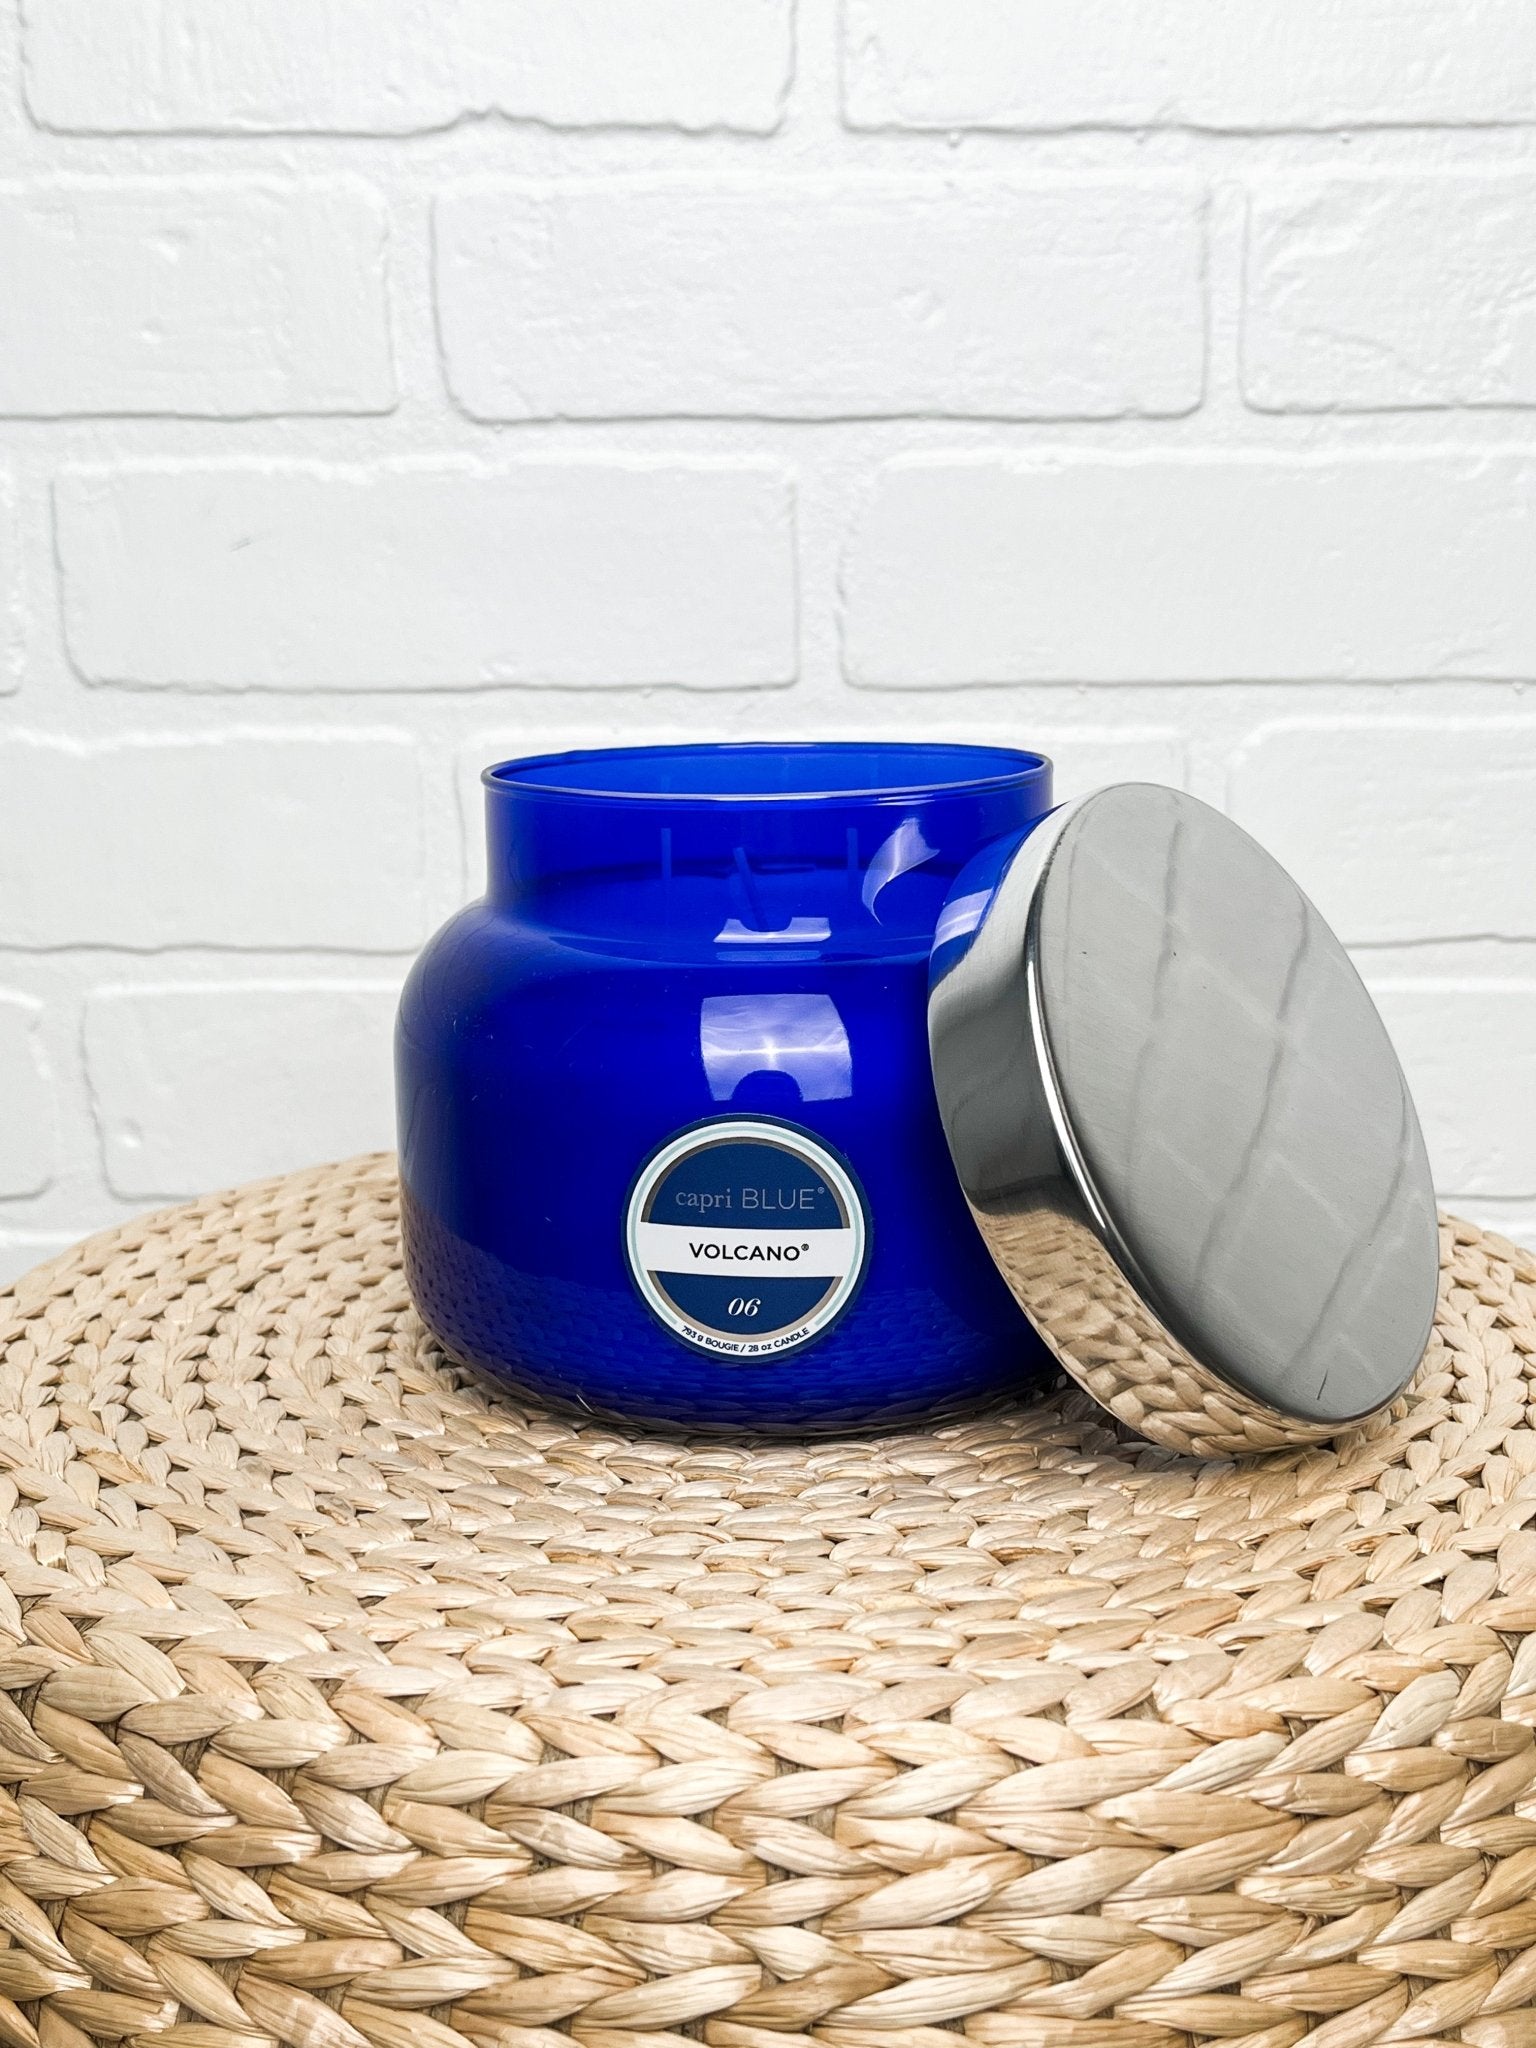 Capri Blue volcano scent 28oz signature candle blue - Trendy Candles and Scents at Lush Fashion Lounge Boutique in Oklahoma City